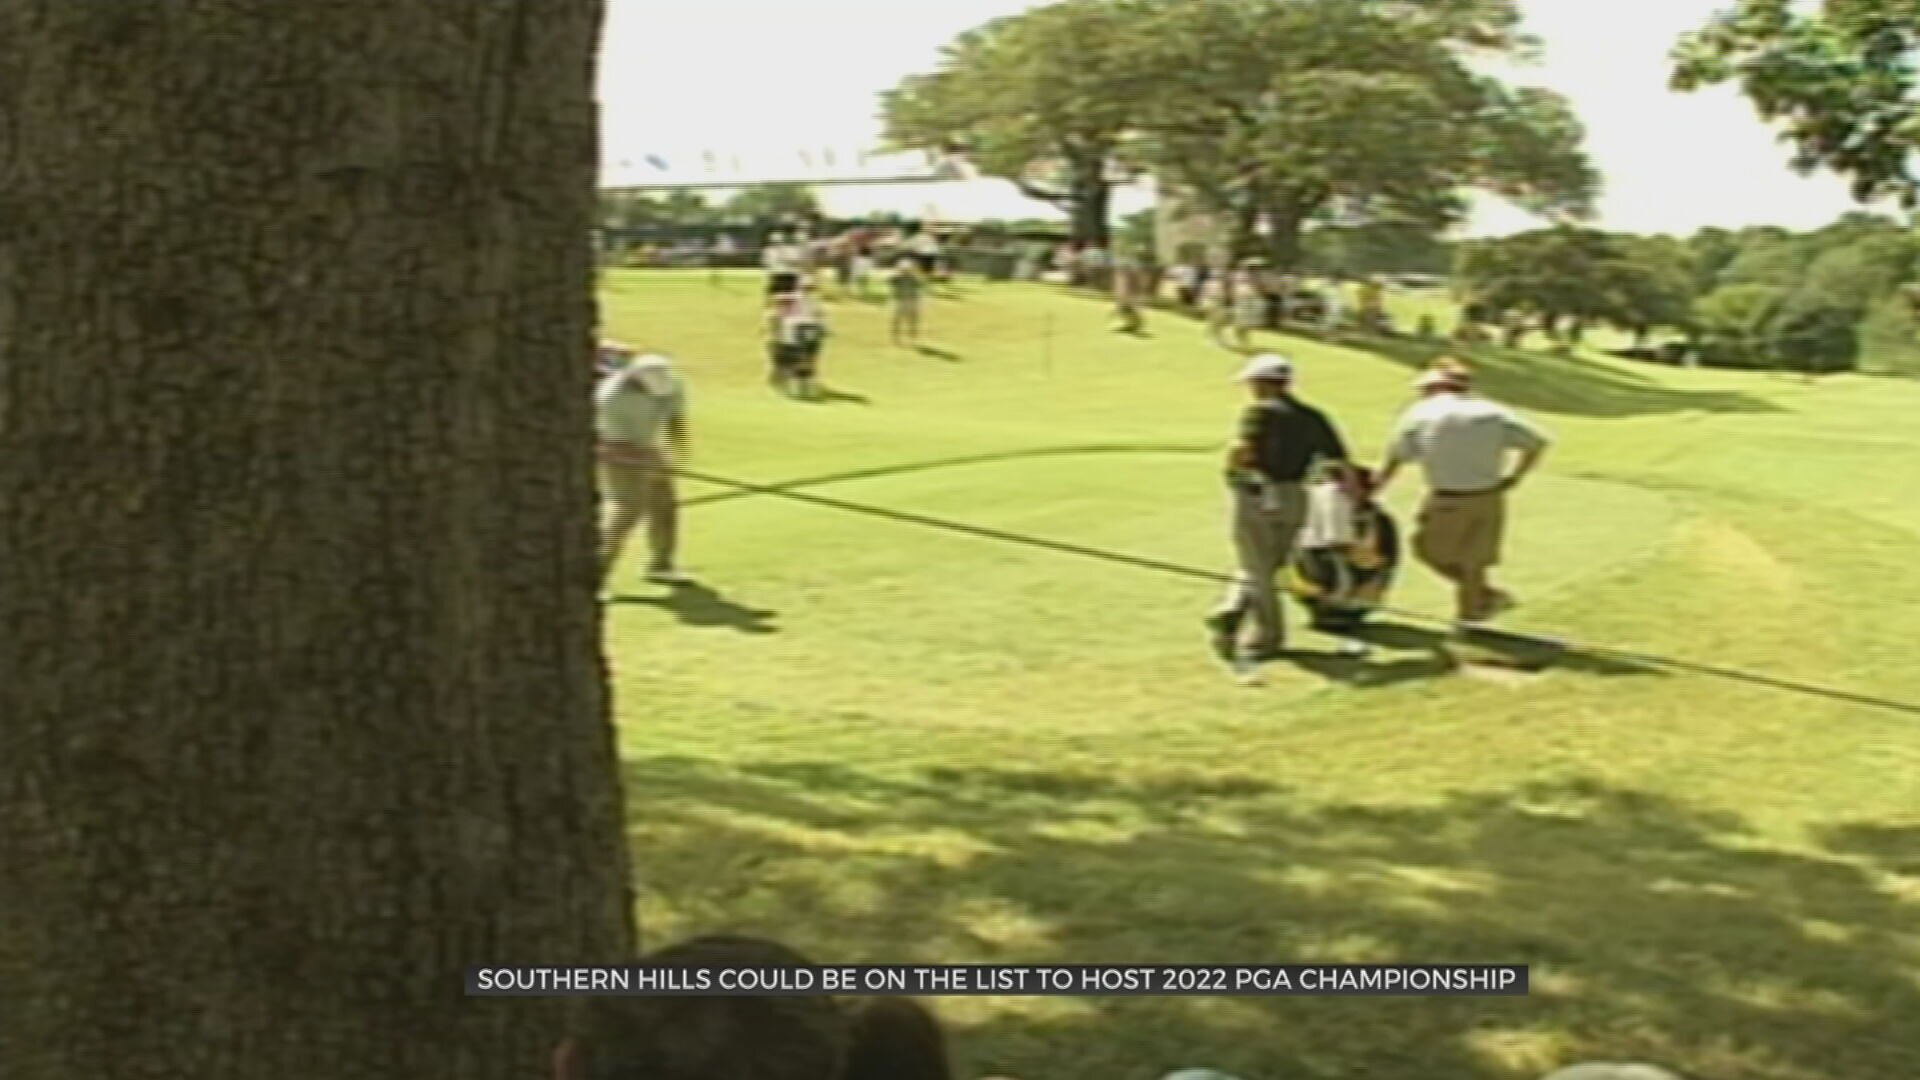 Southern Hills Could Be On List To Host 2022 PGA Championship 